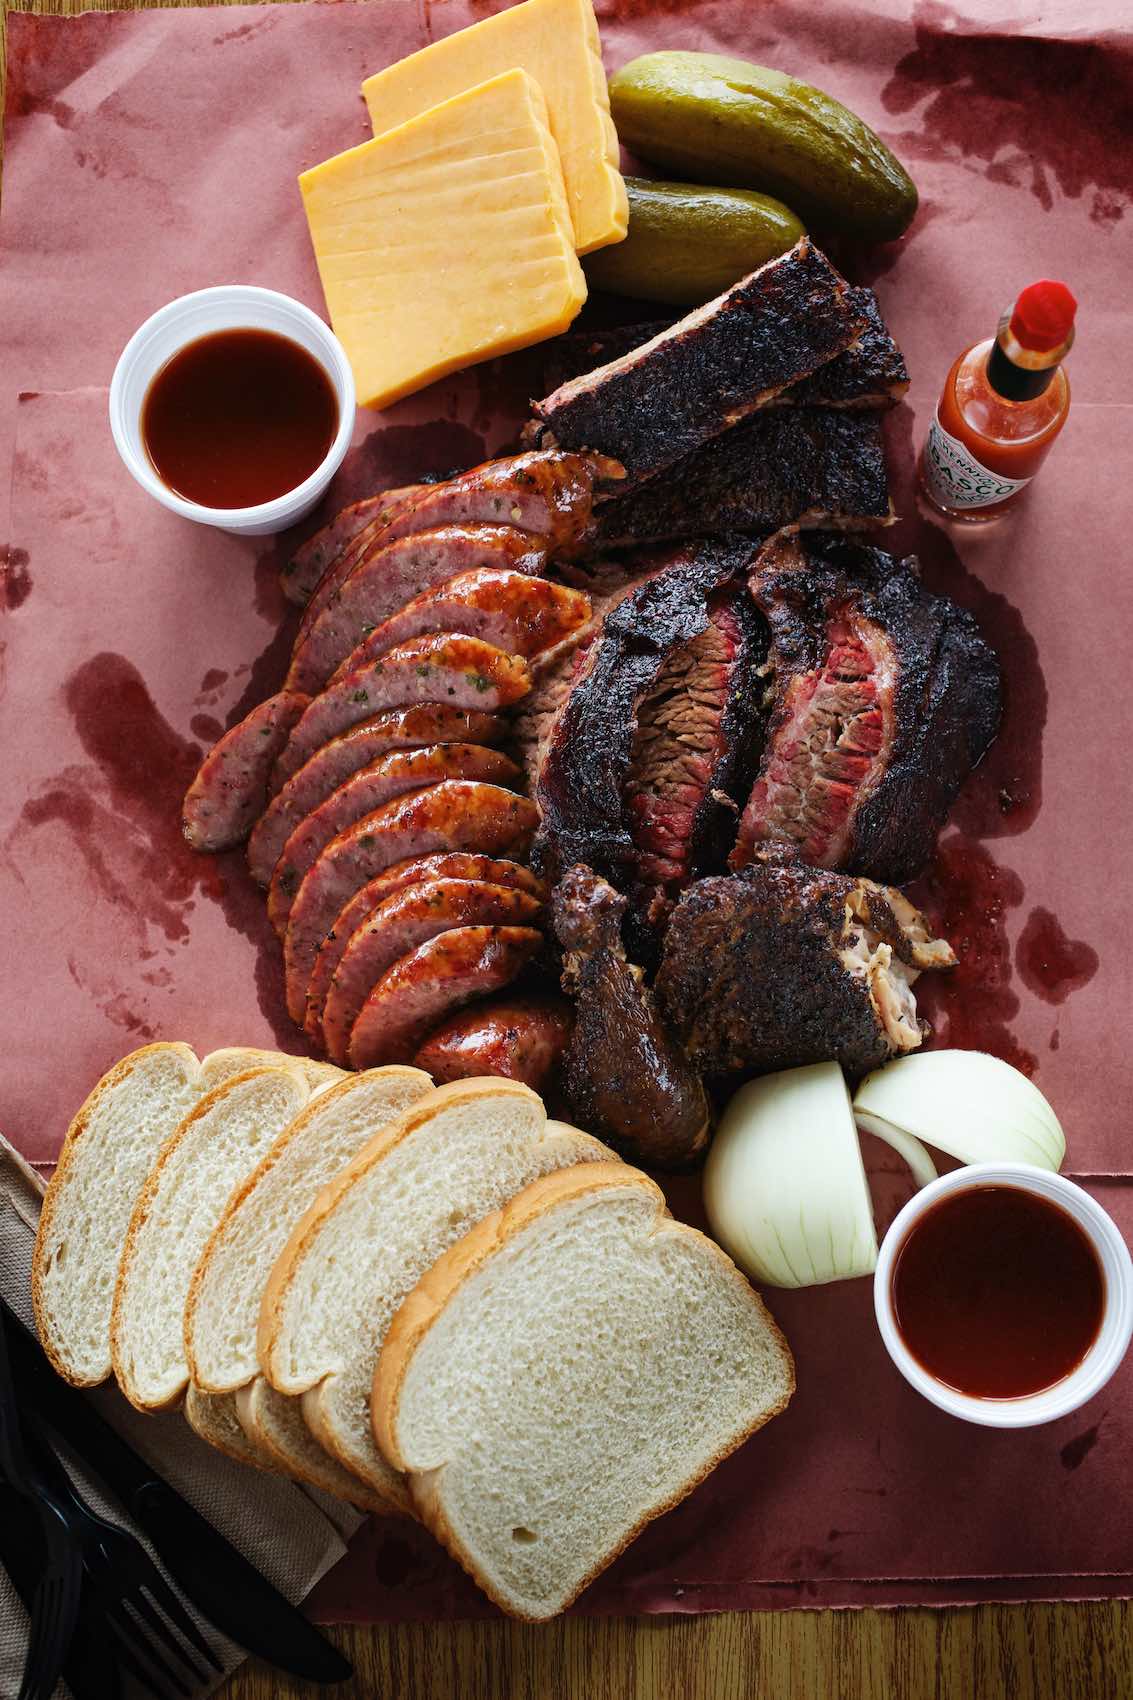 Jody Horton Photography - Barbecue spread on parchment with Tabasco hot sauce. 